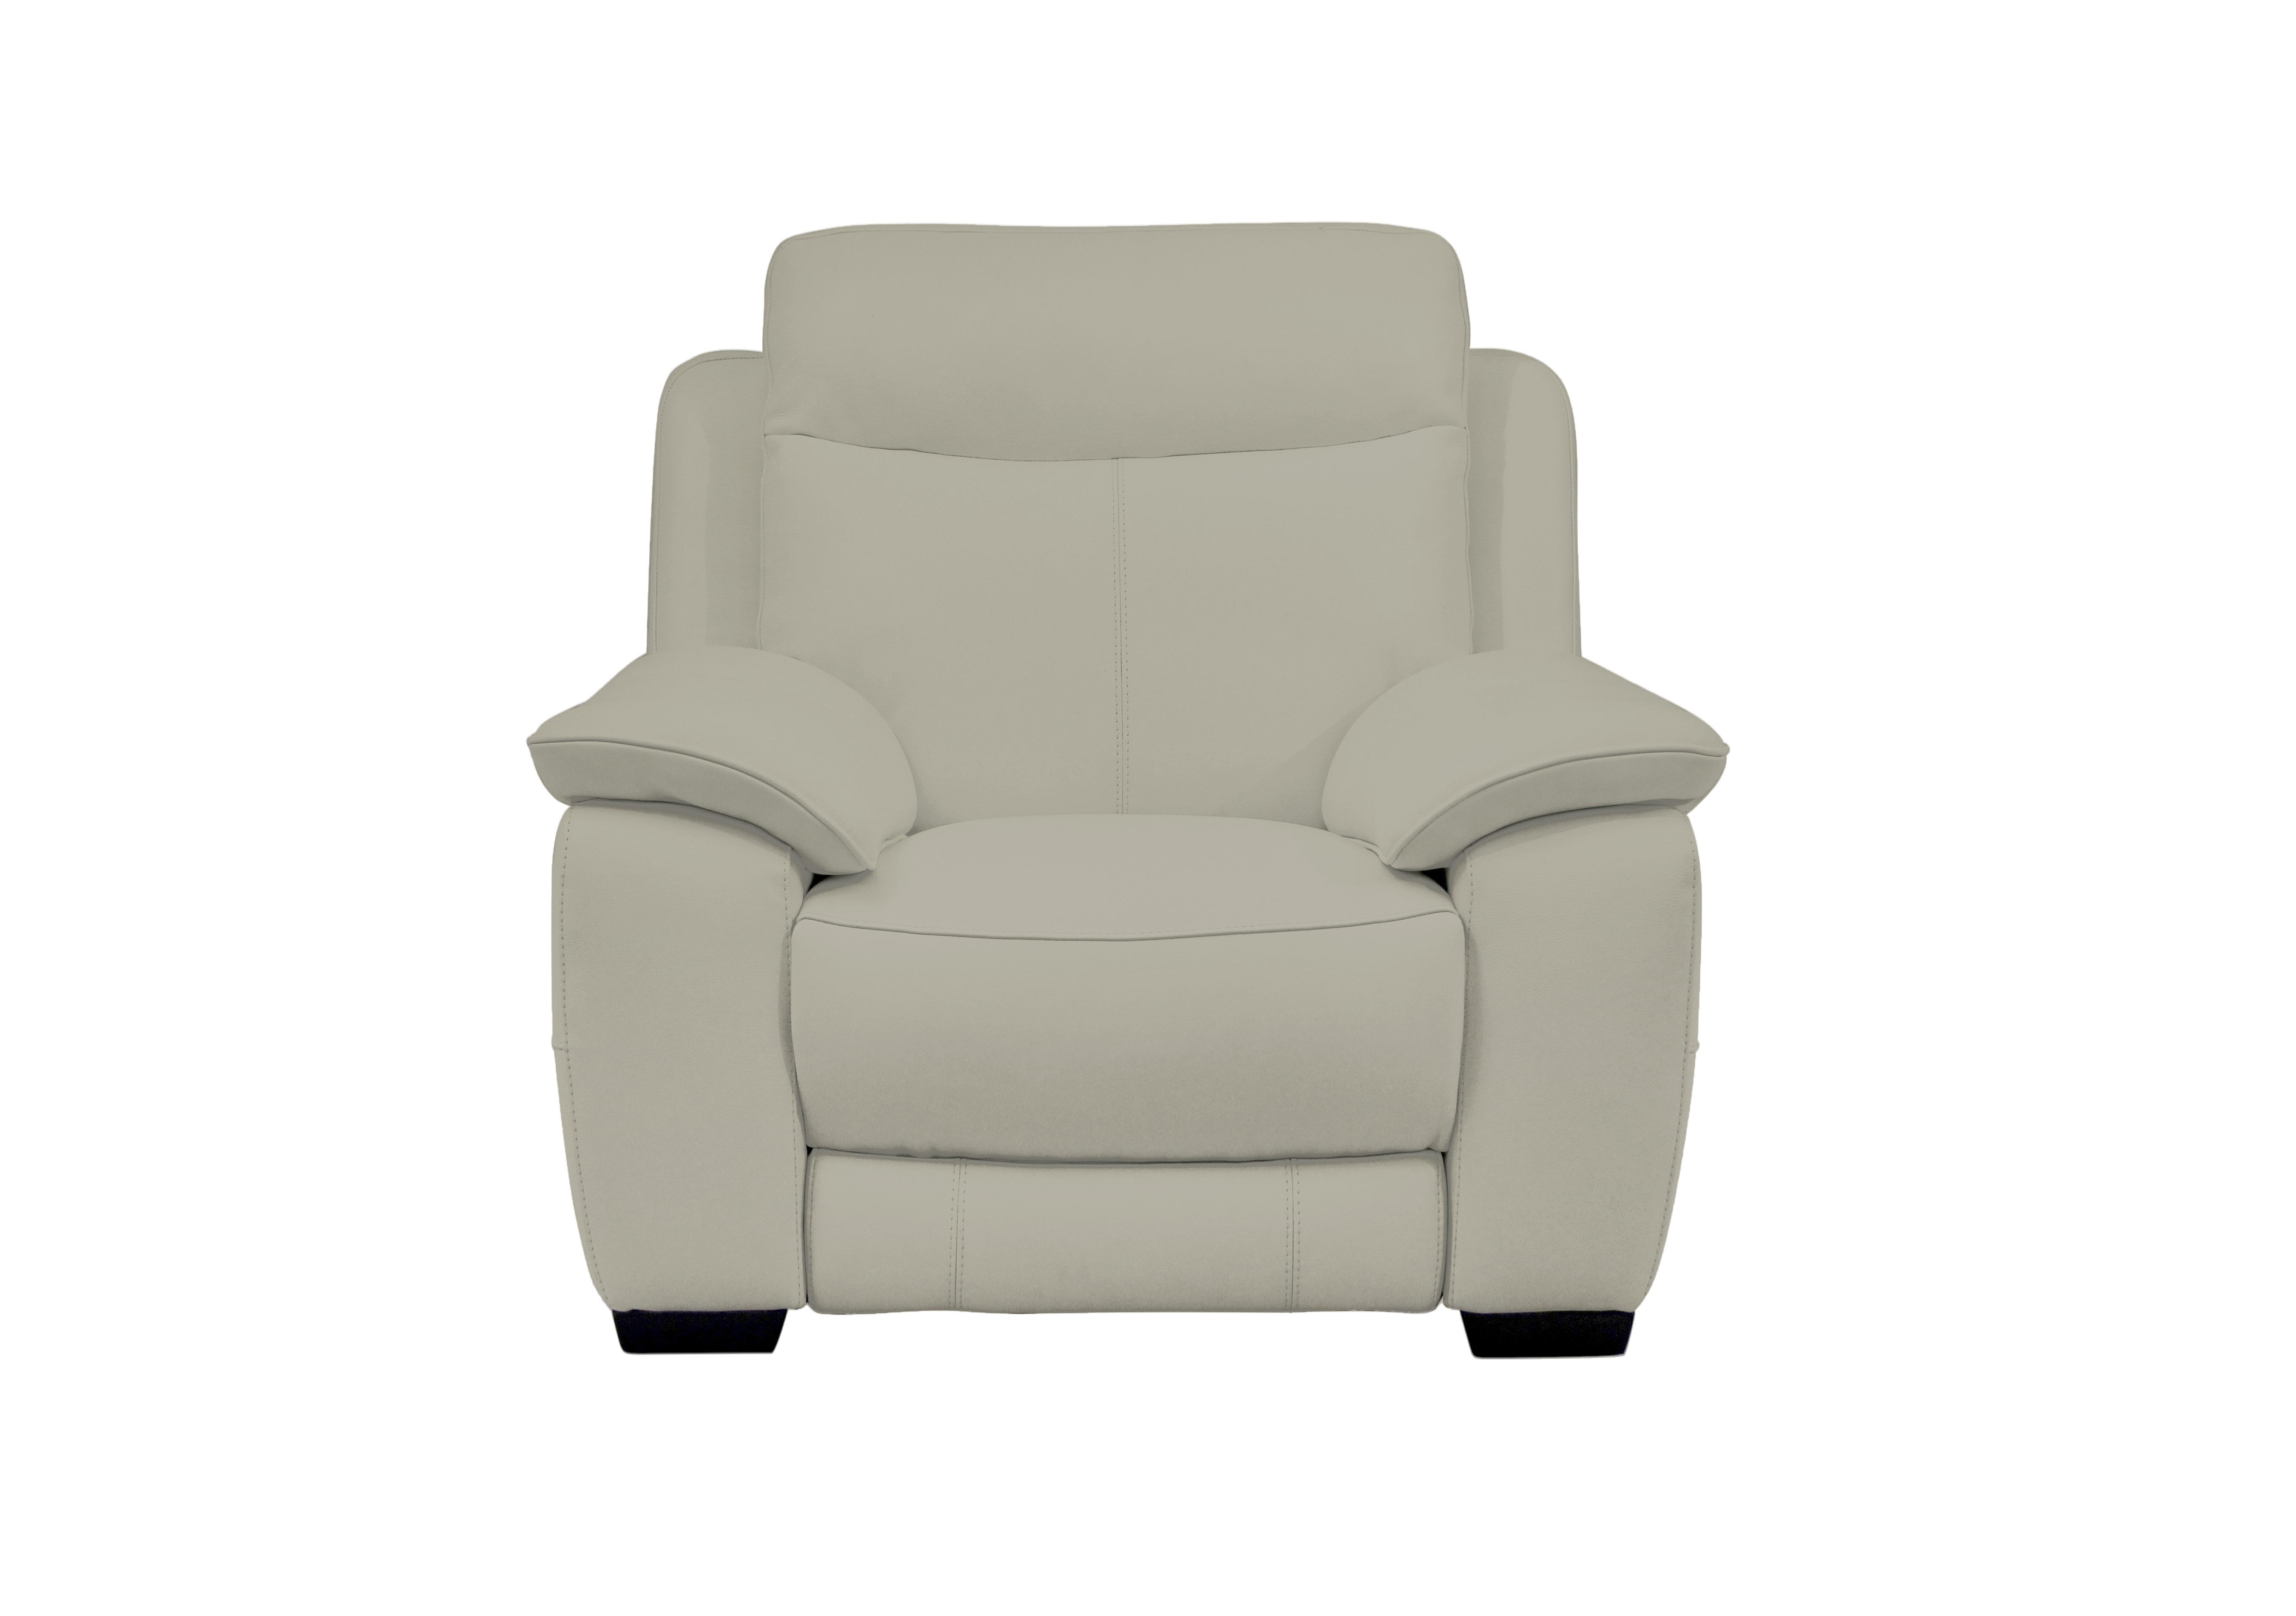 Starlight Express Leather Armchair in Bv-041e Dapple Grey on Furniture Village